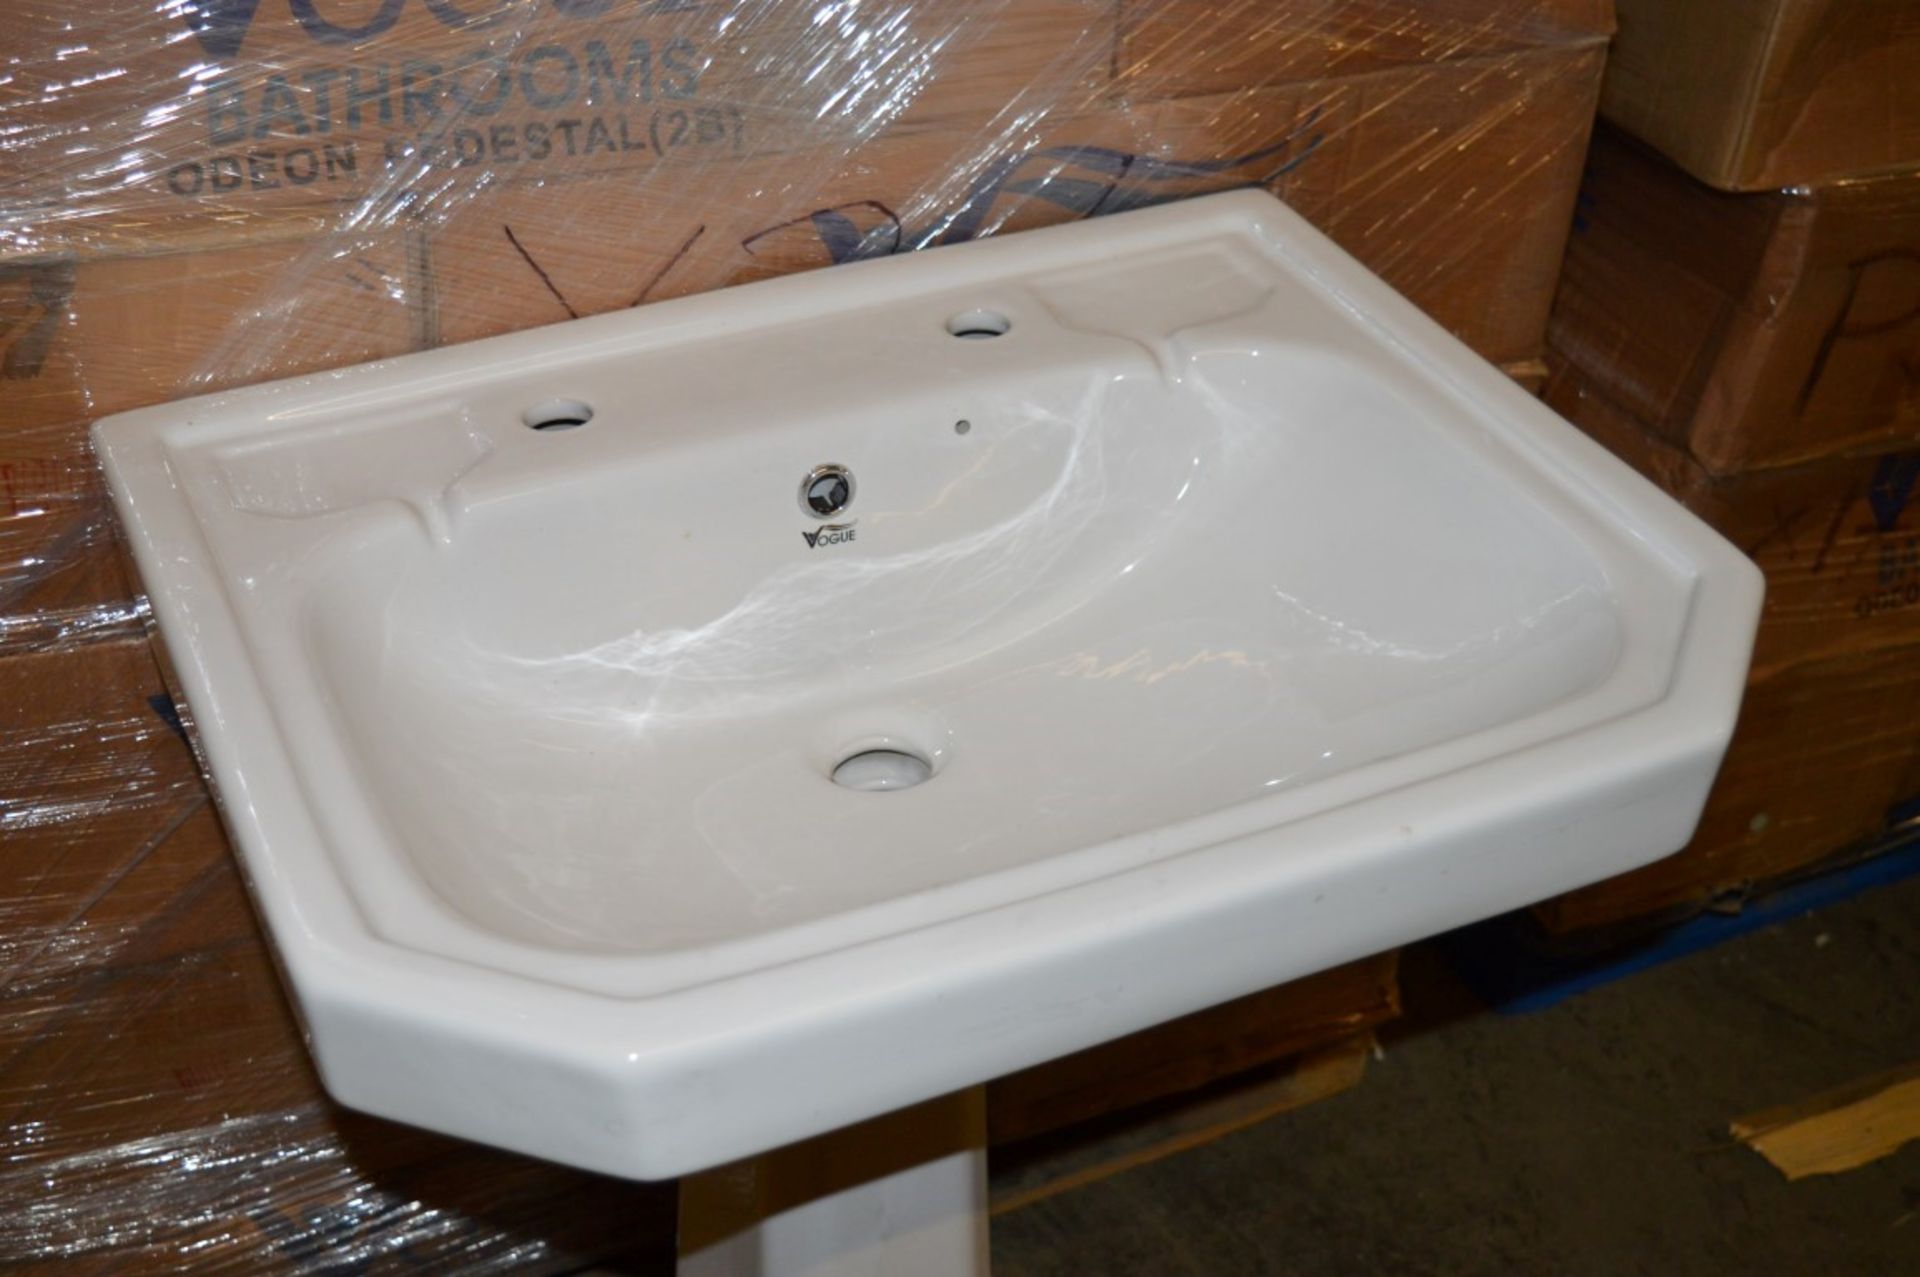 10 x Vogue Bathrooms ODEON Two Tap Hole SINK BASINS With Pedestals - 600mm Width - Brand New Boxed - Image 2 of 2